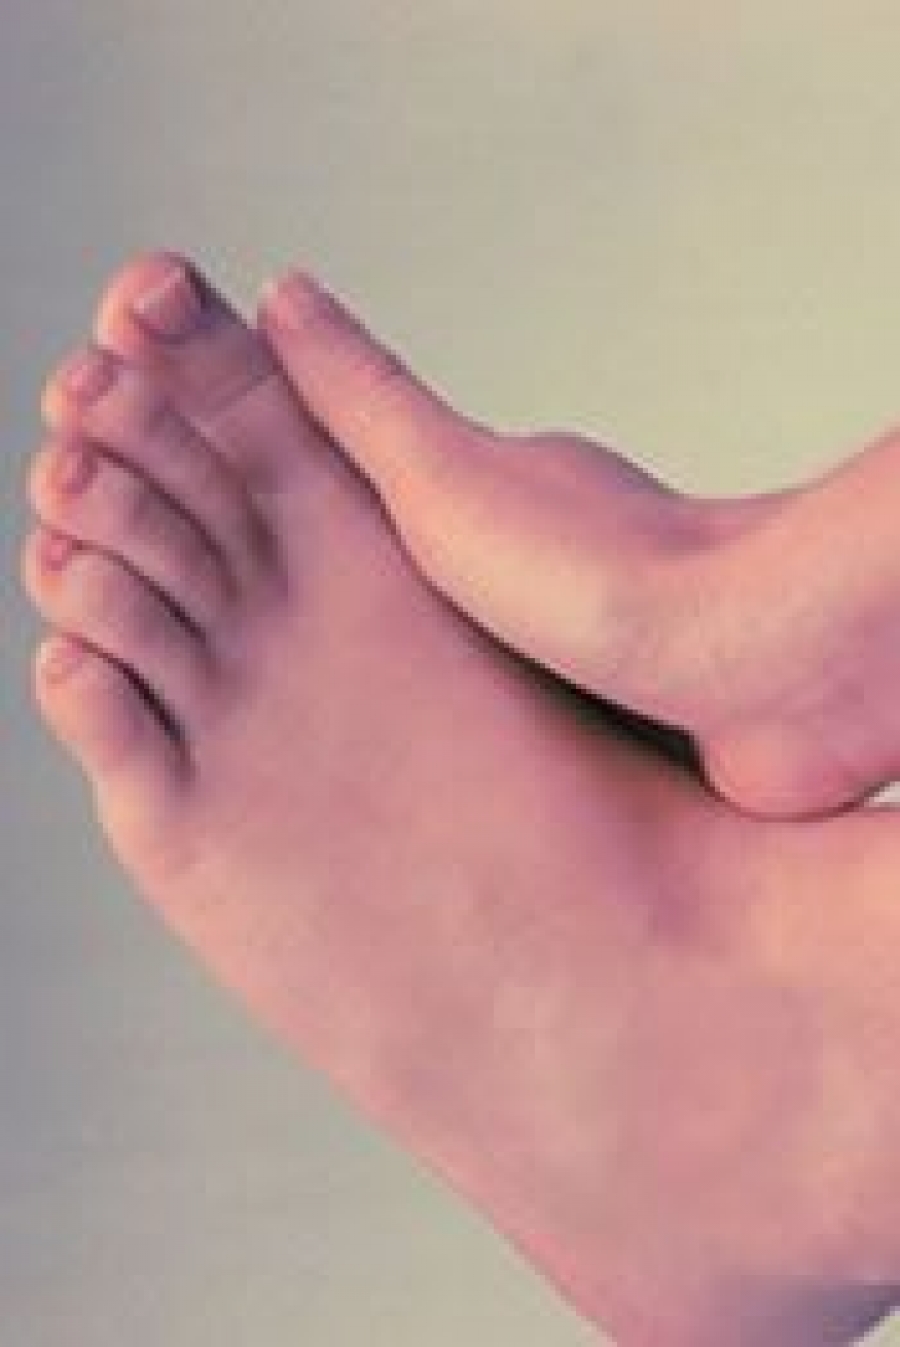 Dr Brandon Nelson, A Board-Certified Foot & Ankle Surgeon, Discusses the Most Common Causes of Heel Pain in Children